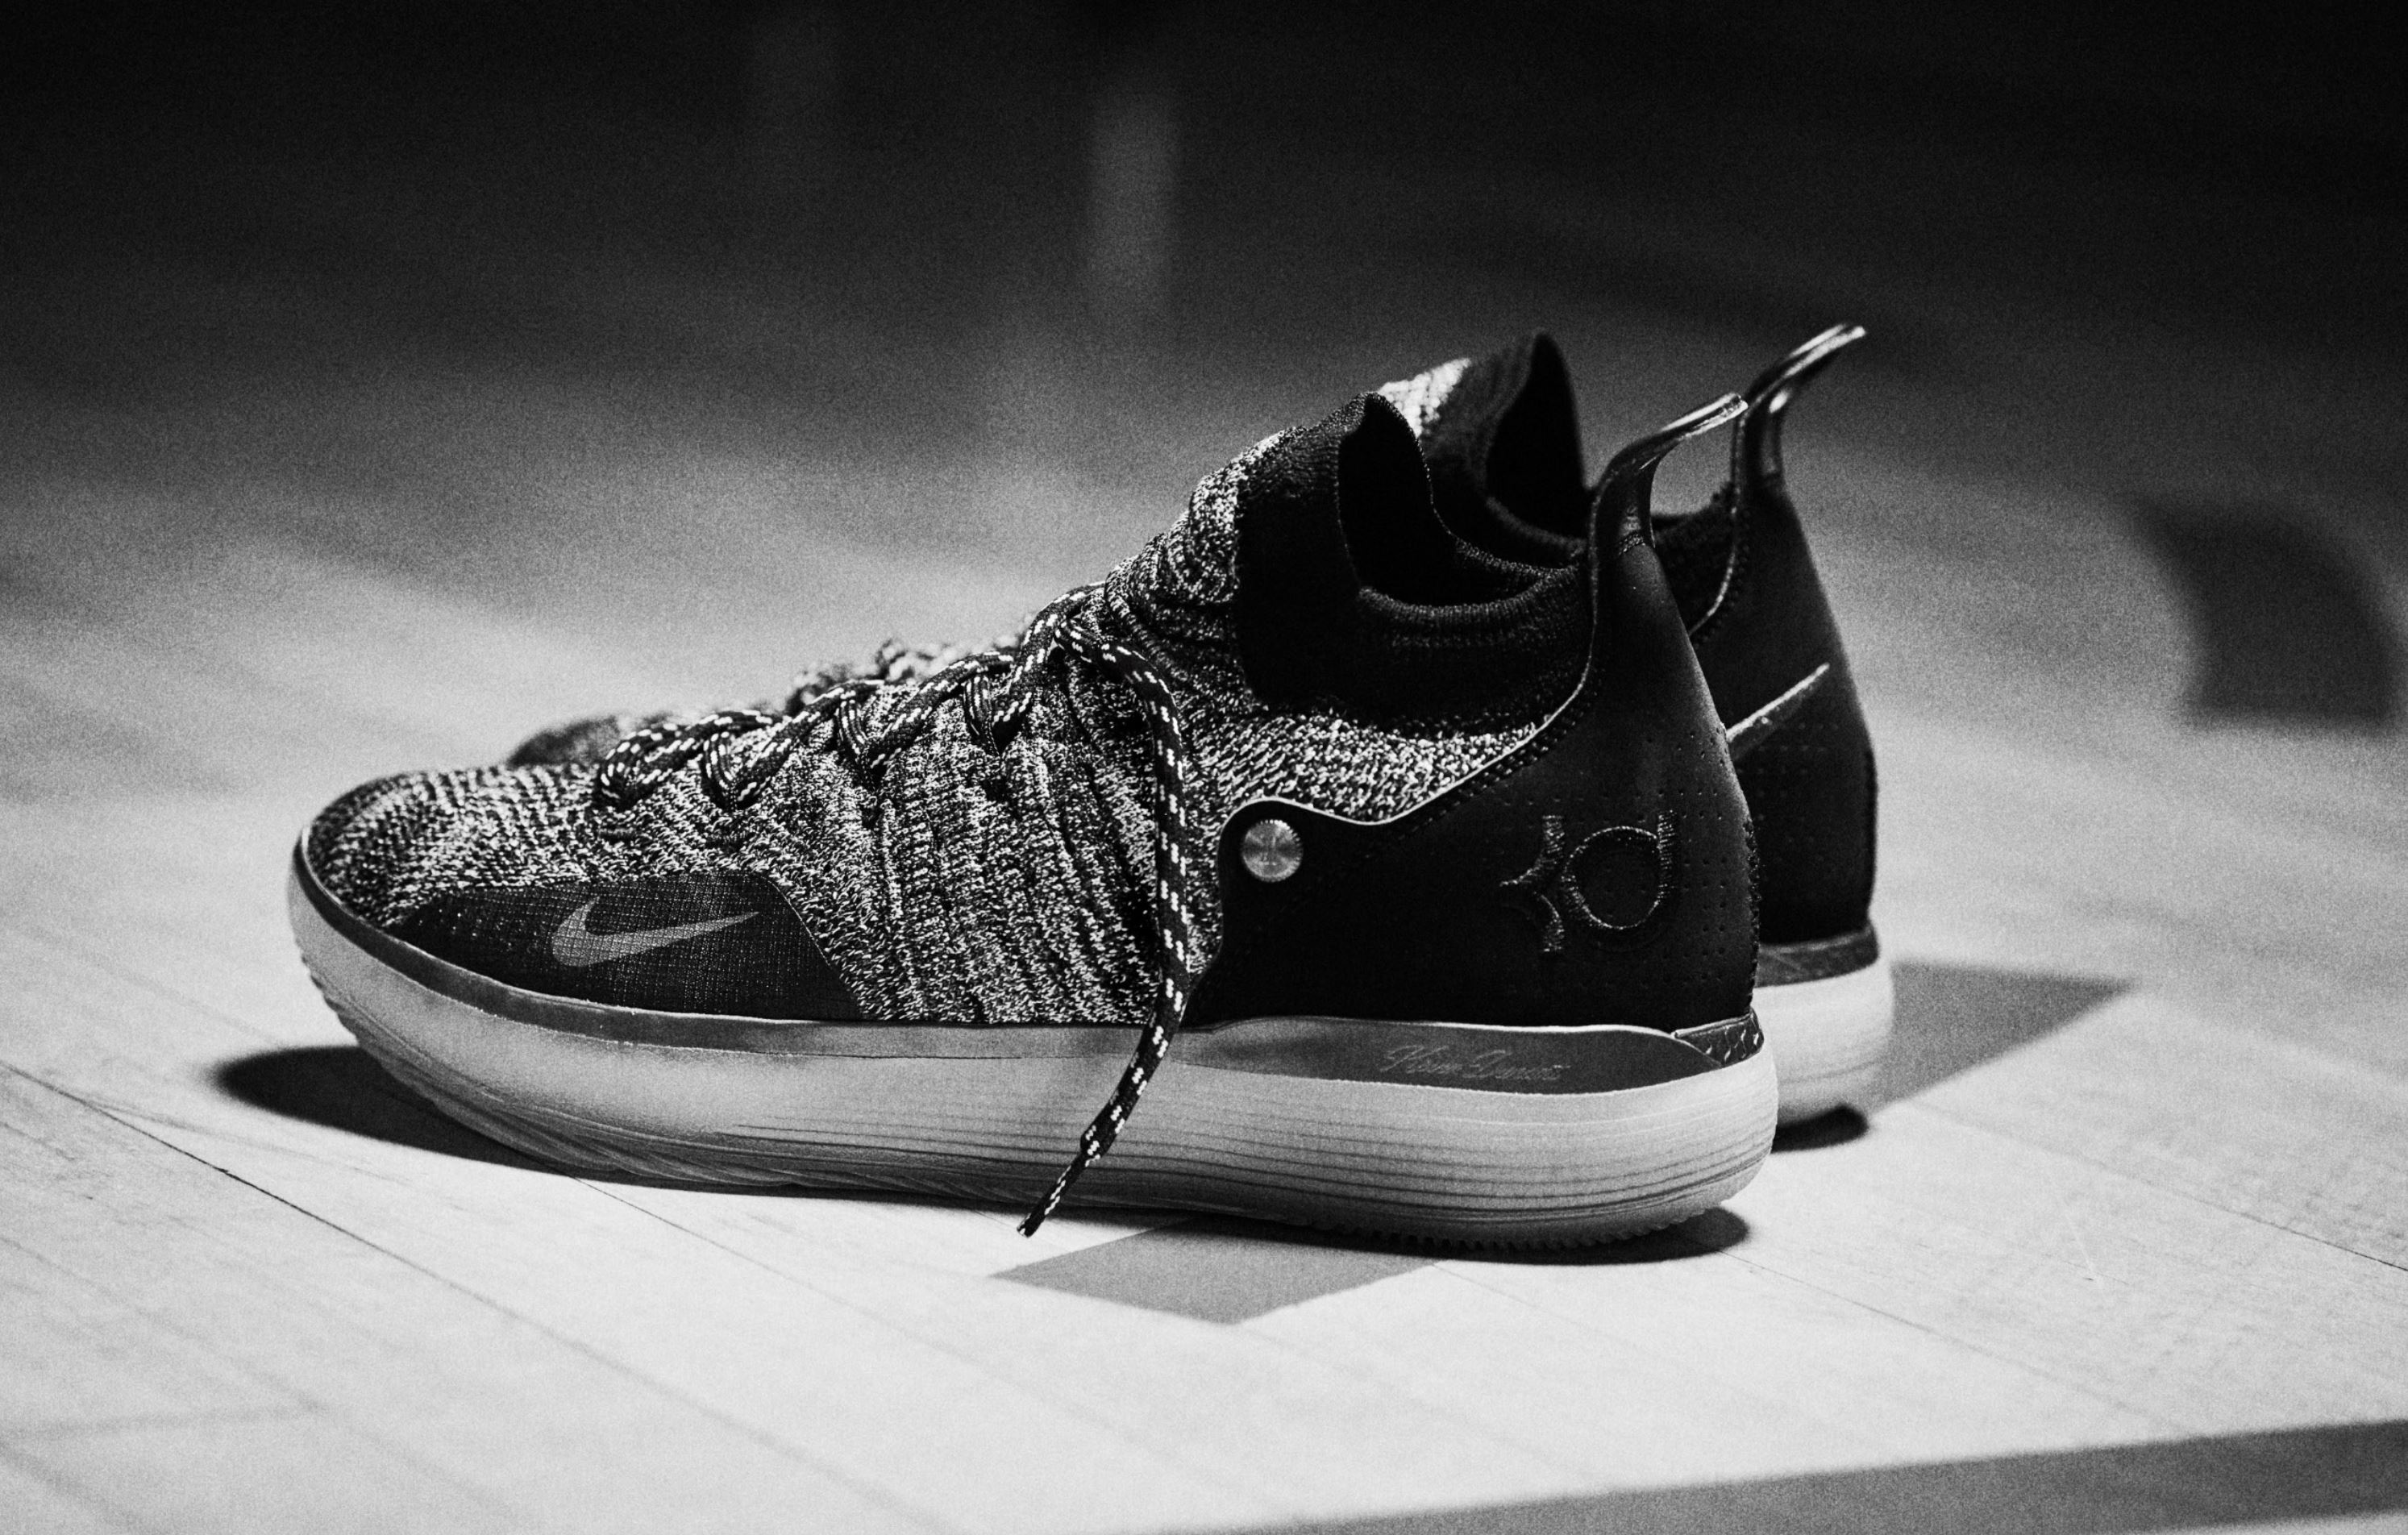 Nike Officially Unveils the KD 11 